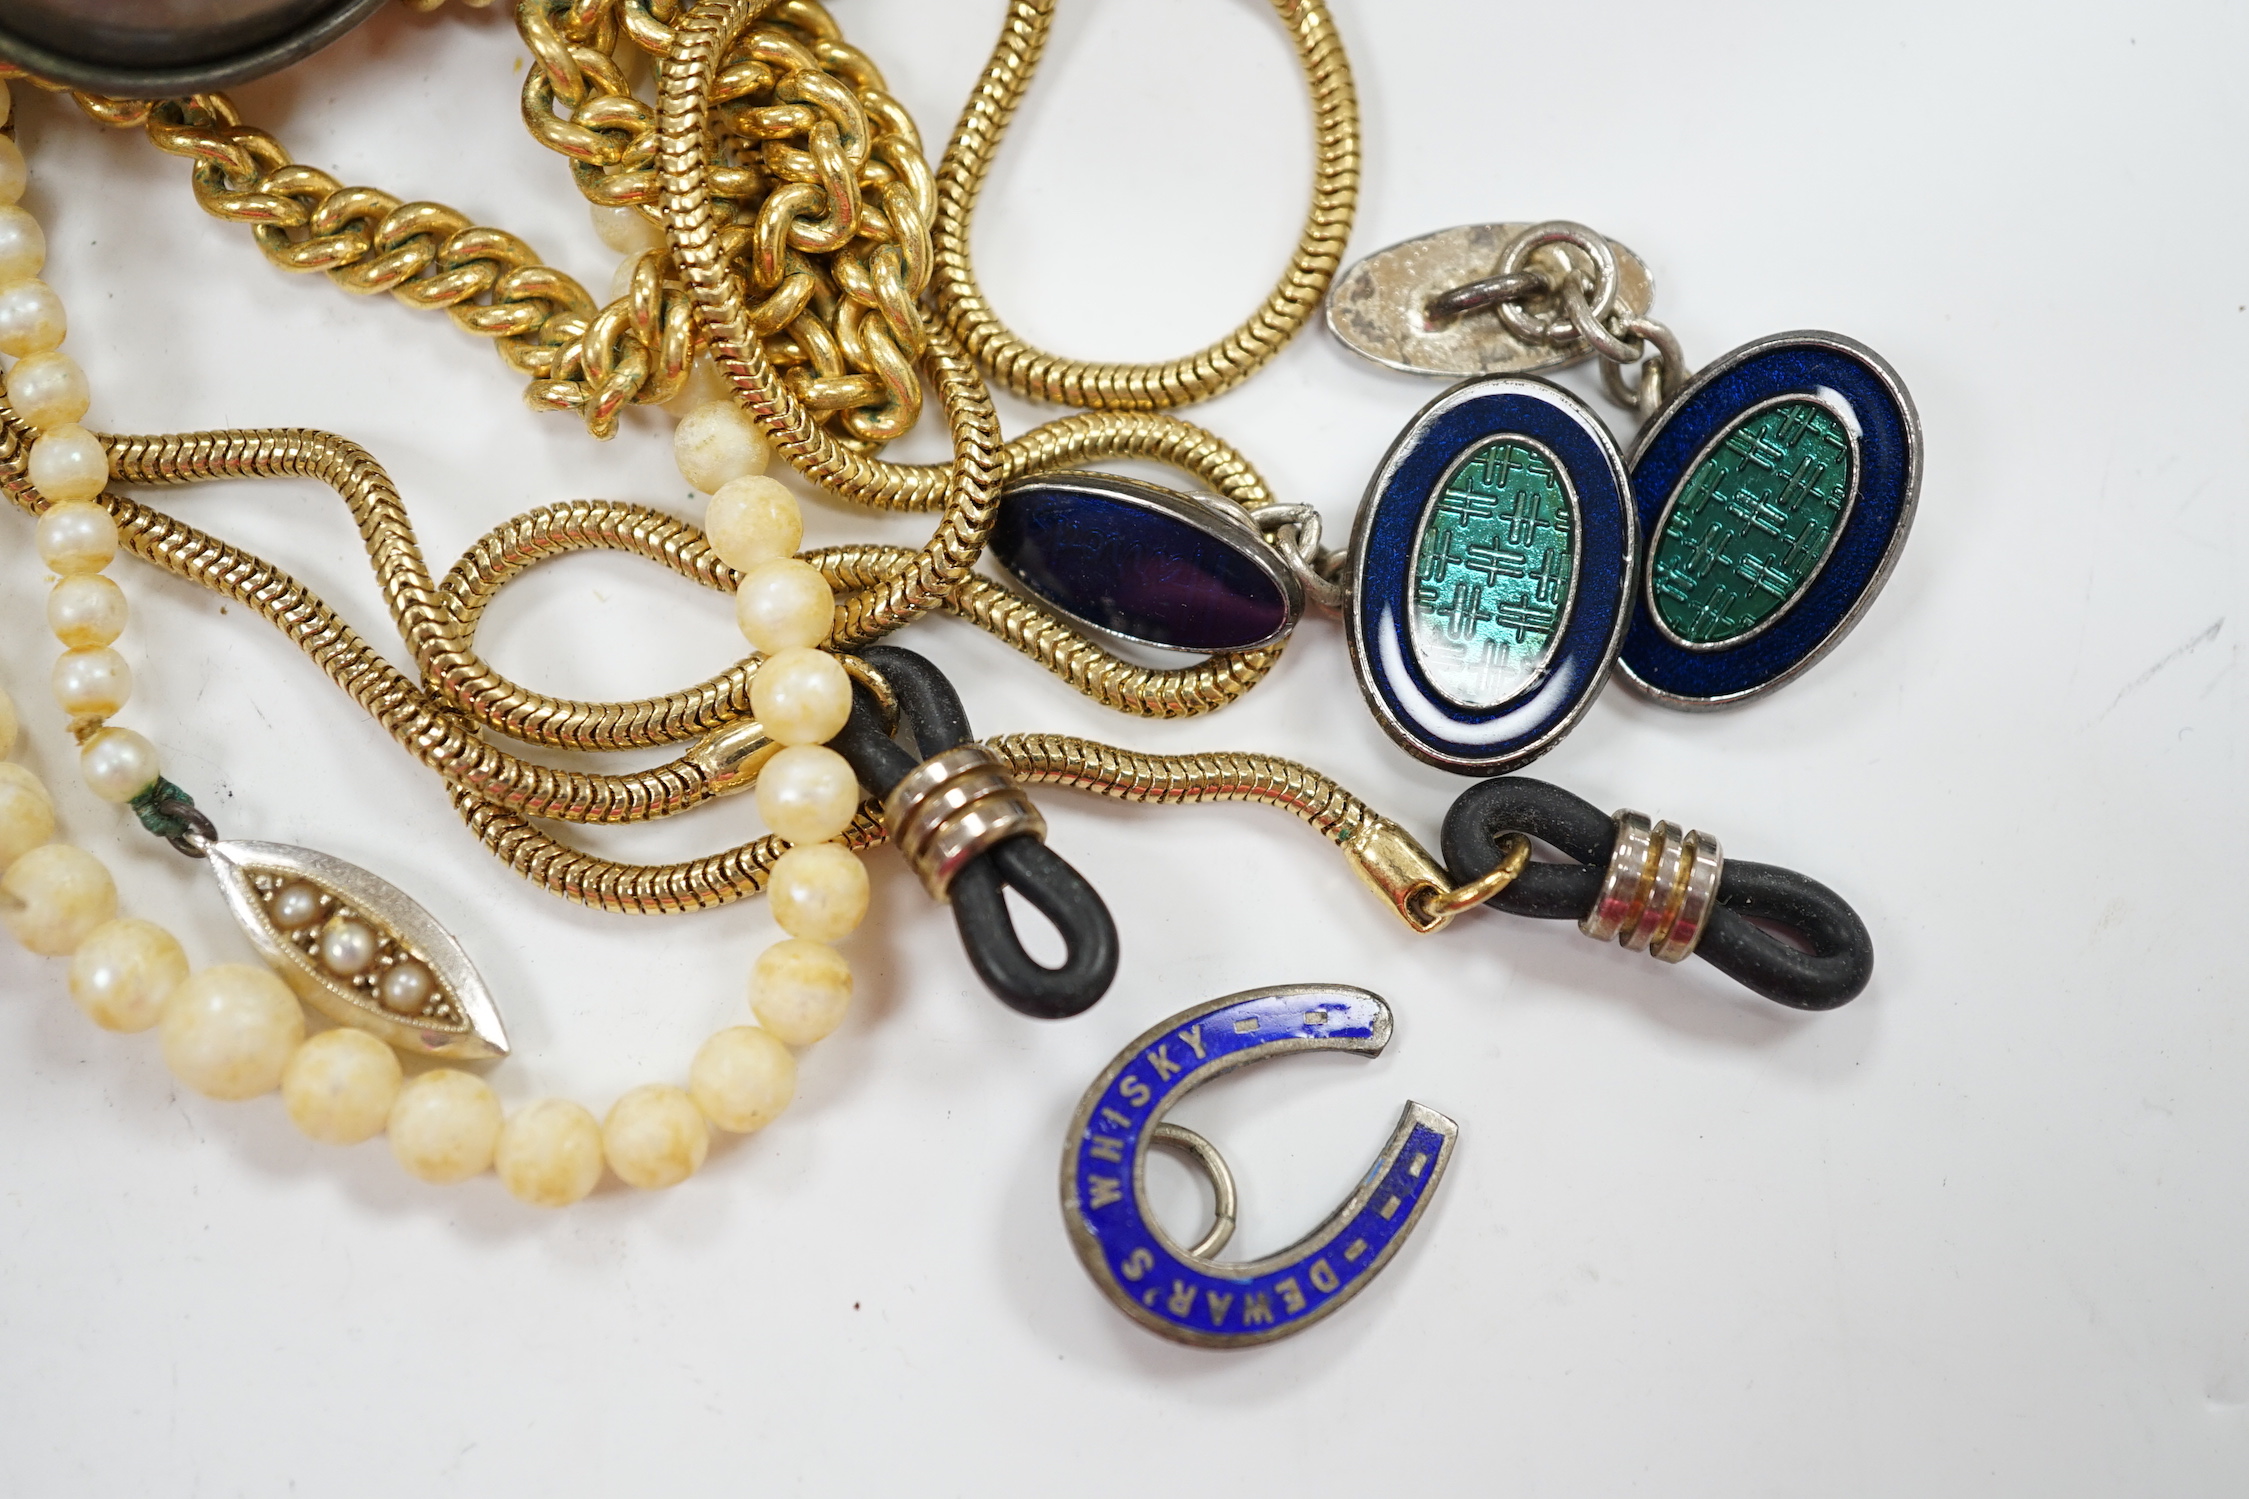 A small 9ct gold and gem set pendant, 22mm, three gilt metal chains, two white metal cufflinks, a Citizen watch, other costume jewellery and three ceramic items.